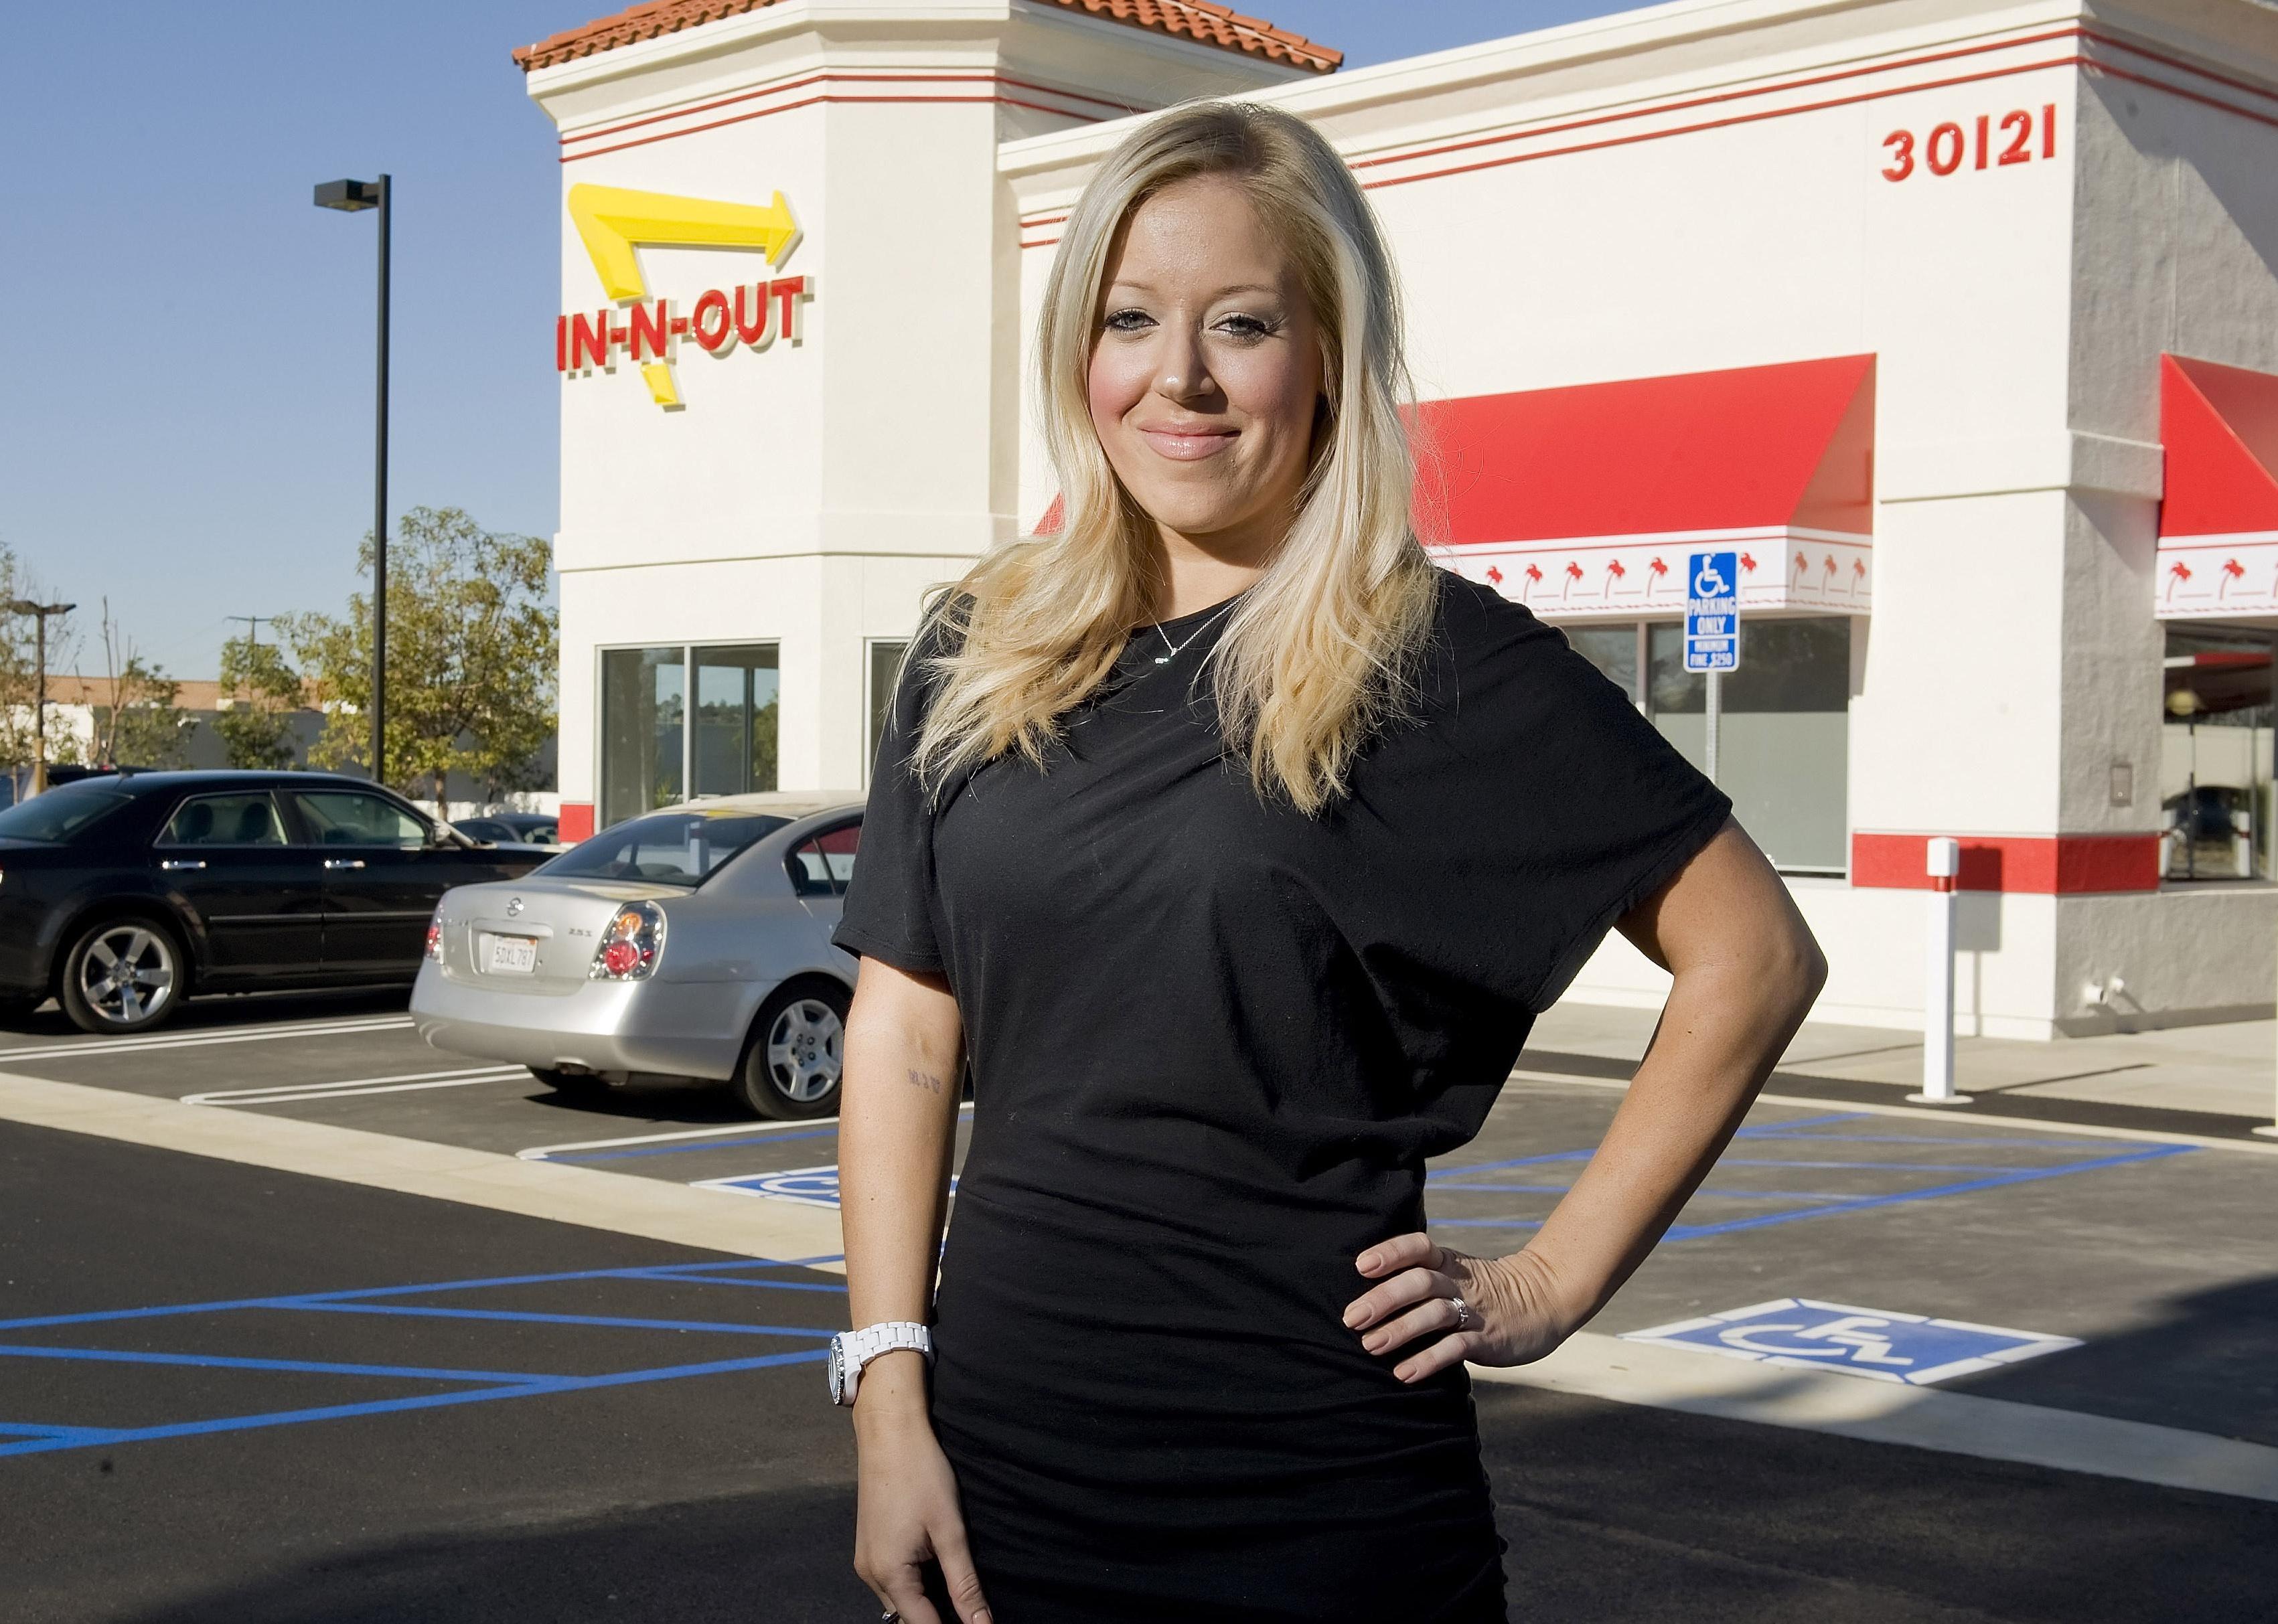 Lynsi Snyder in front of an In-N-Out Burger restaurant.